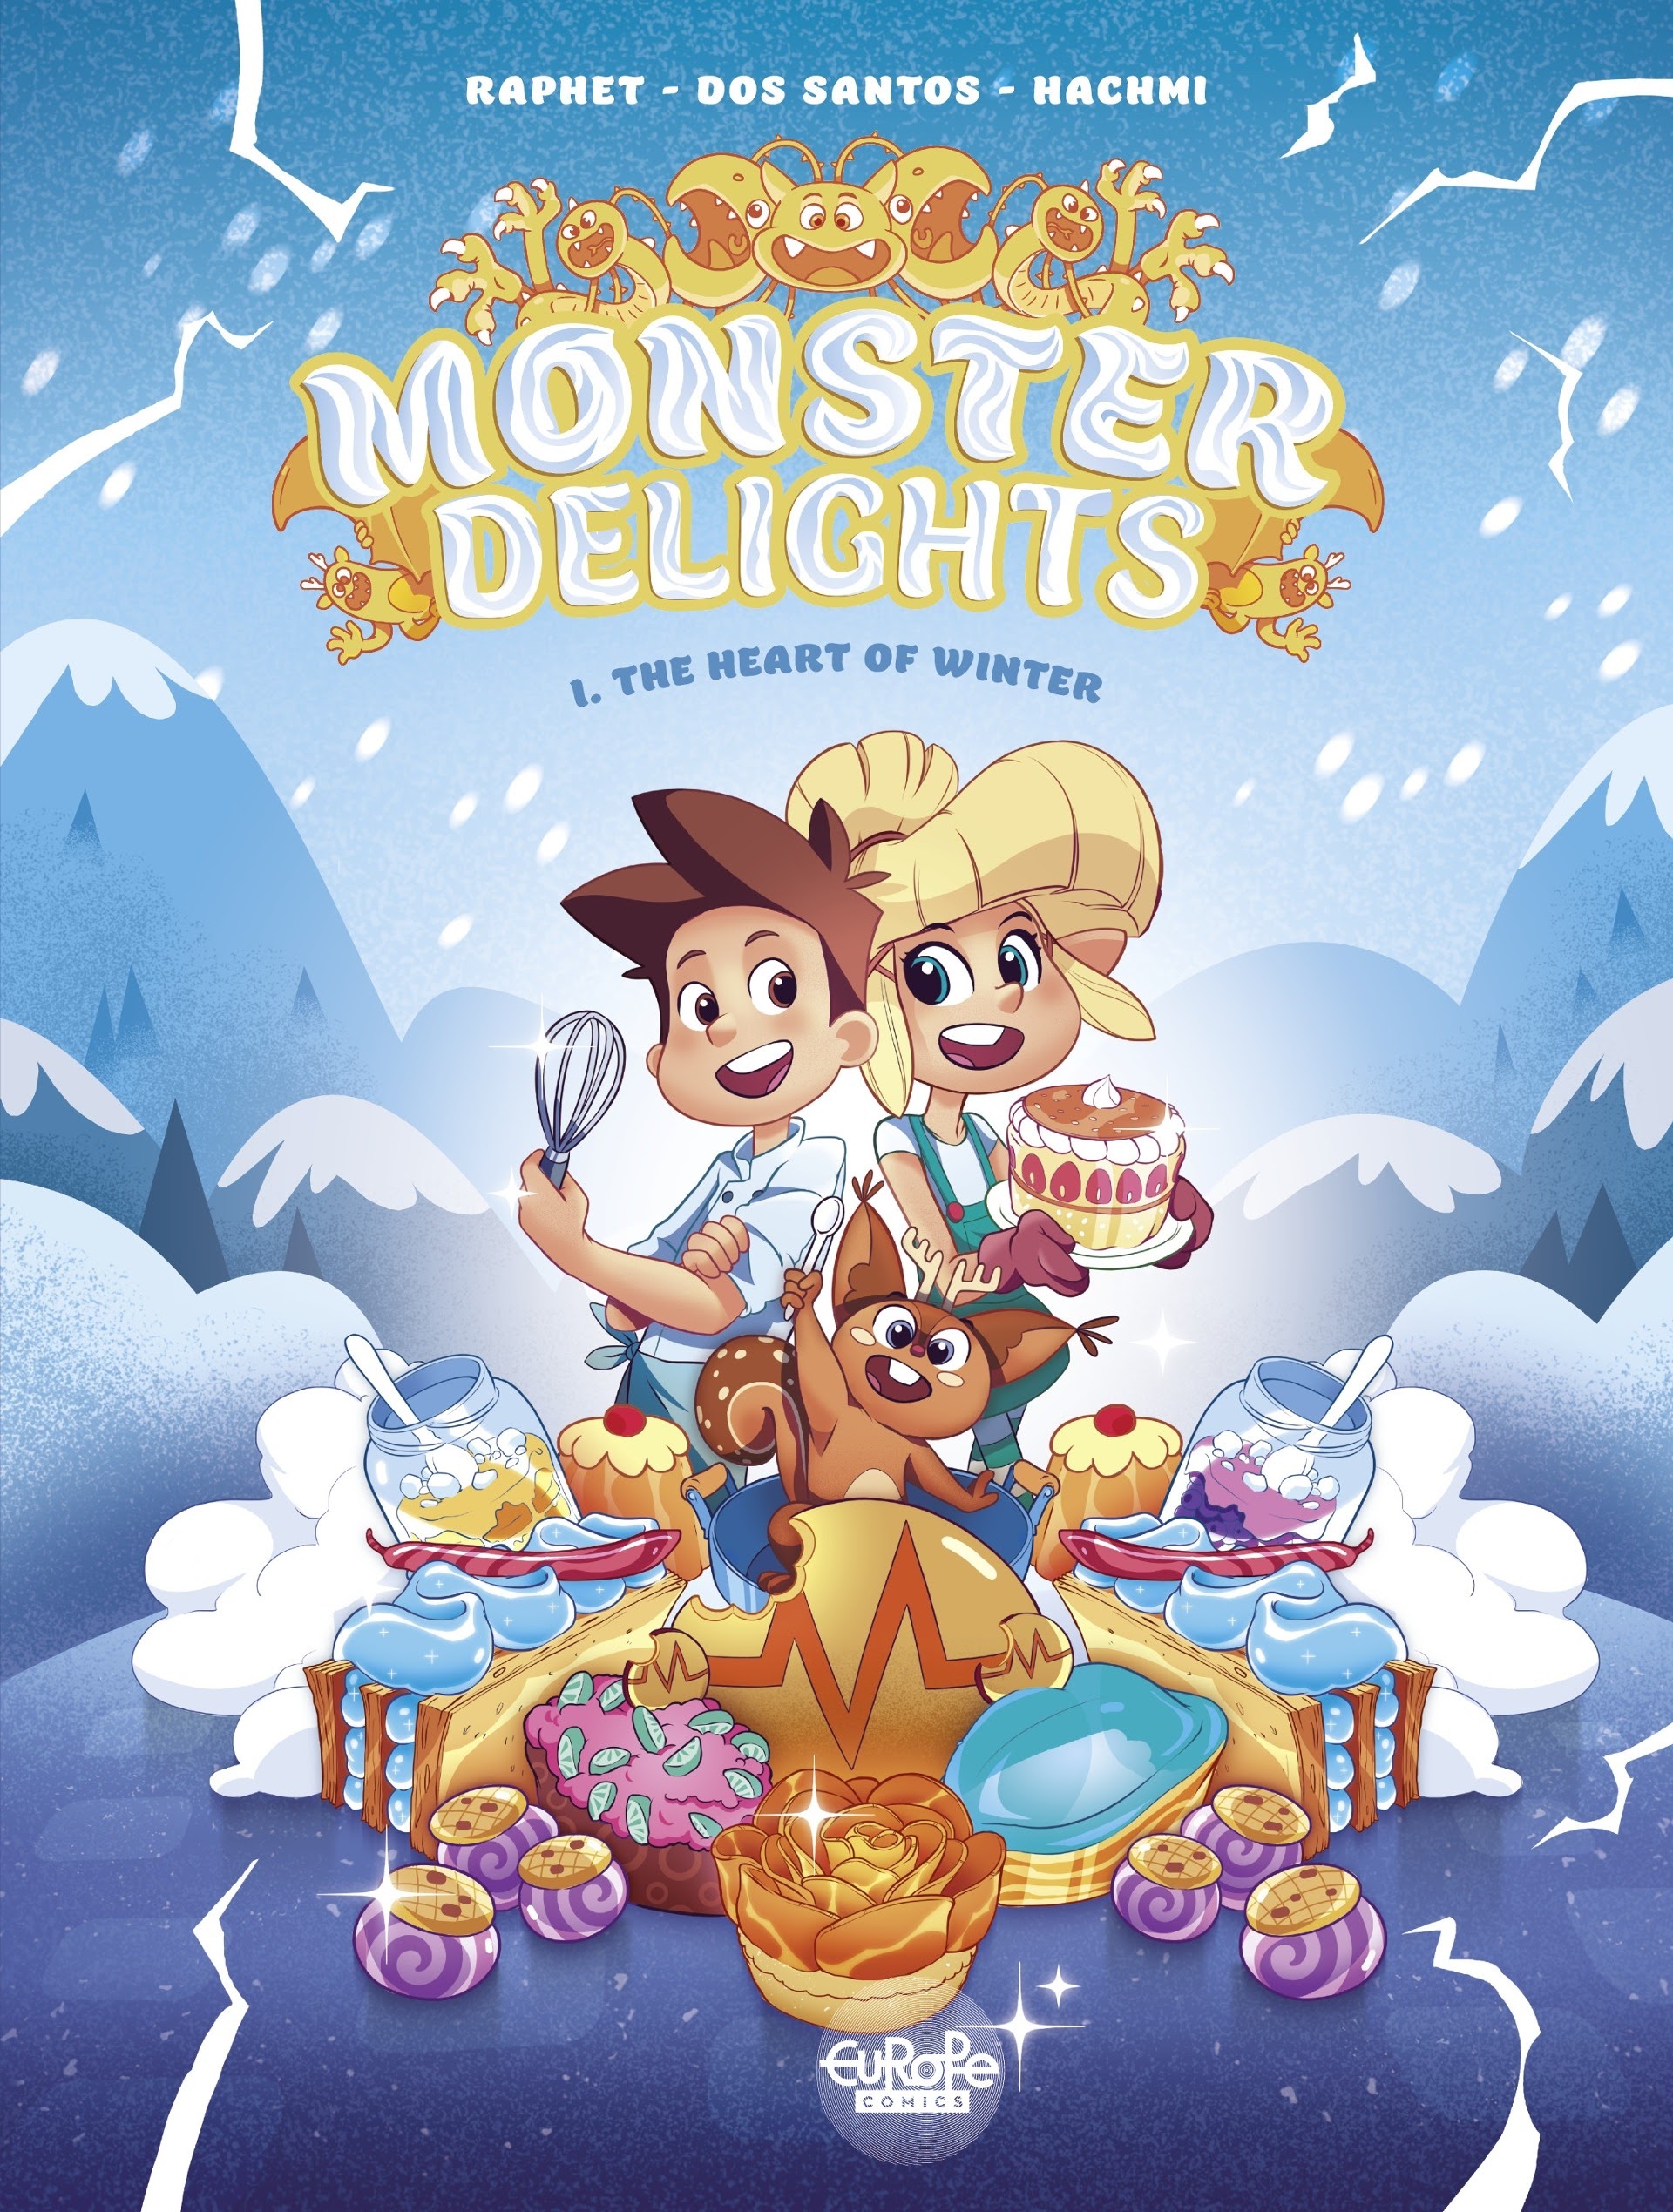 Read online Monster Delights comic -  Issue #1 - 1